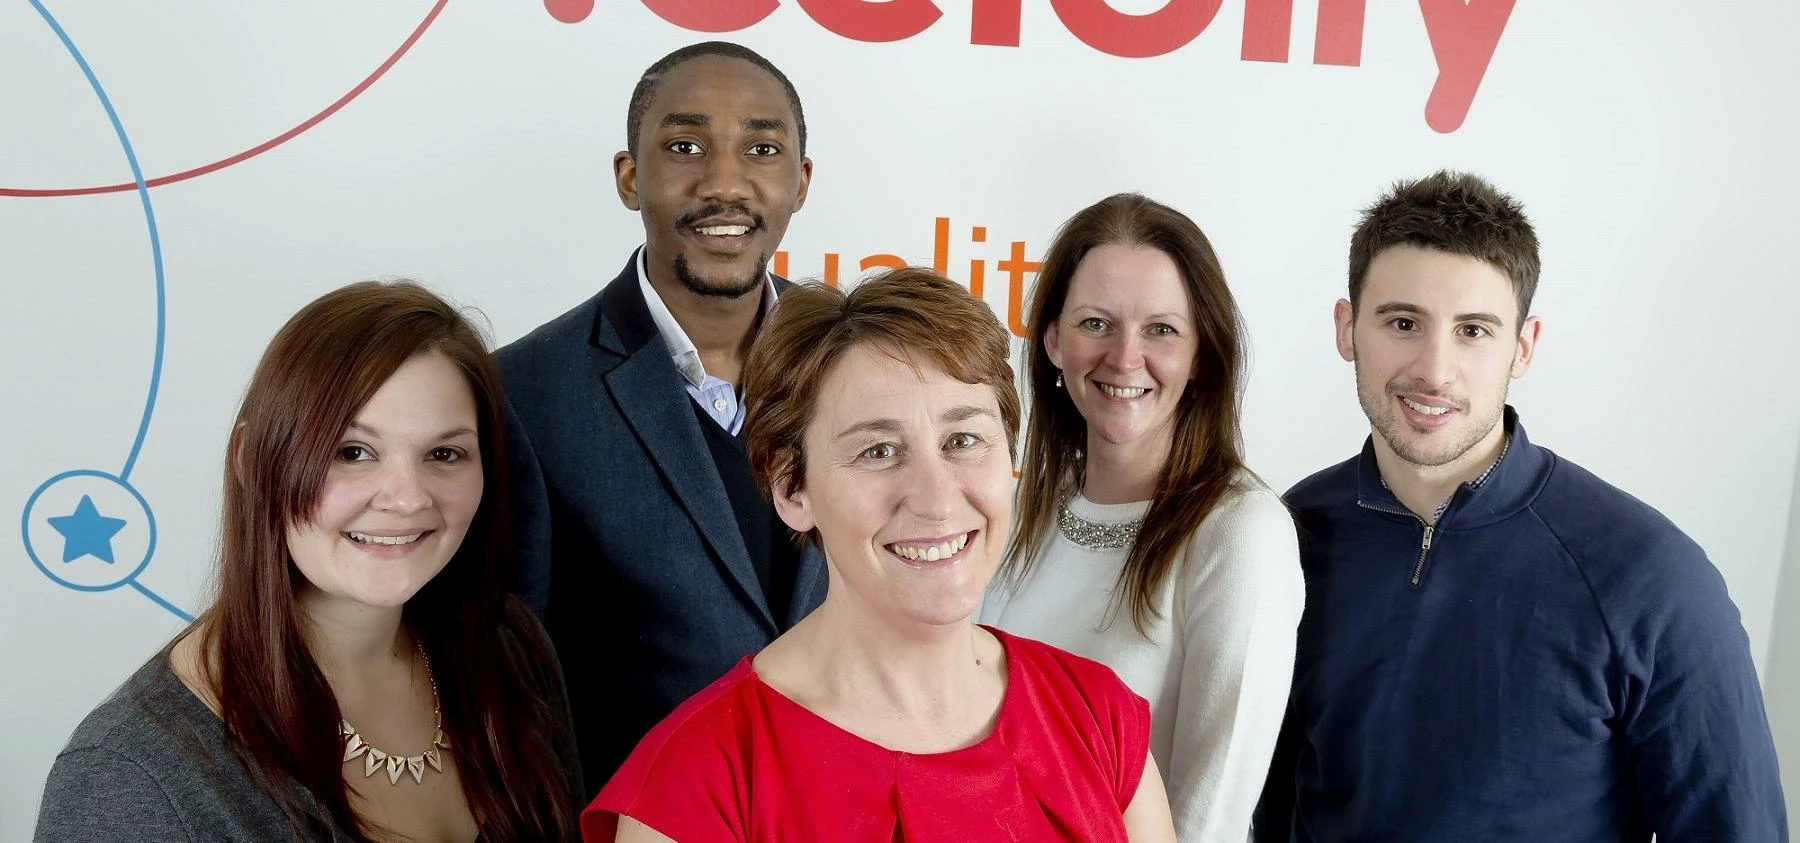 IceLolly.com’s HR Manager Linda Woolley (centre) with the team